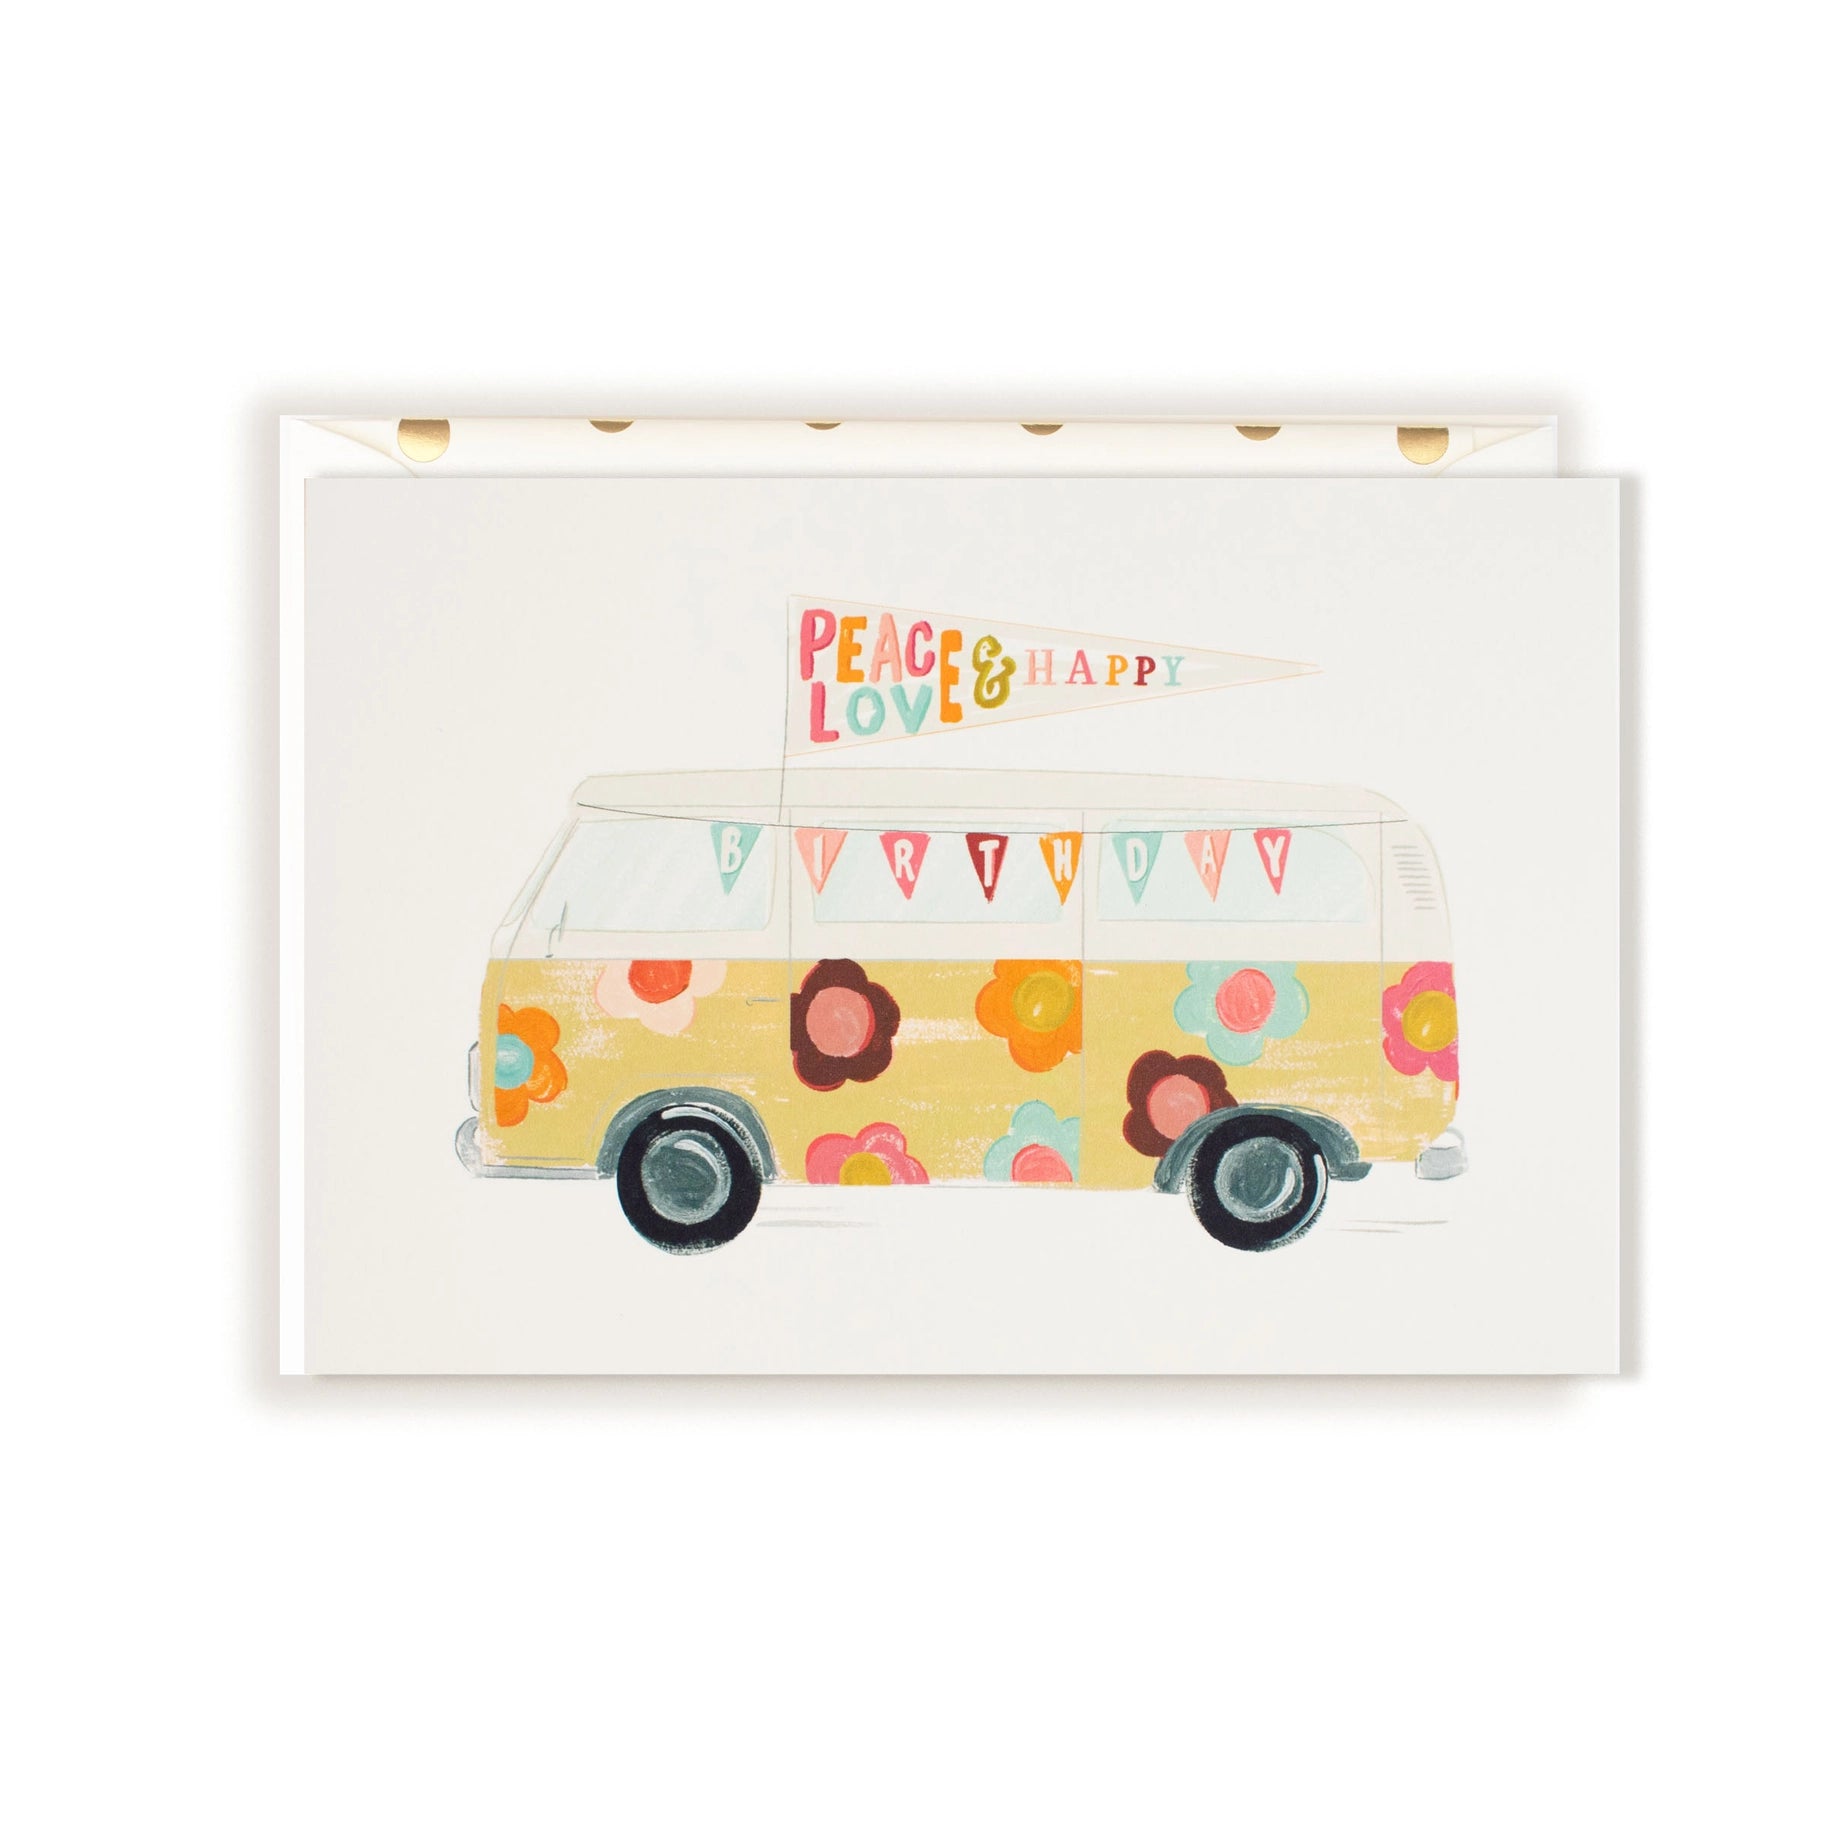 VW FLORAL BUS-PEACE LOVE HAPPY BIRTHDAY